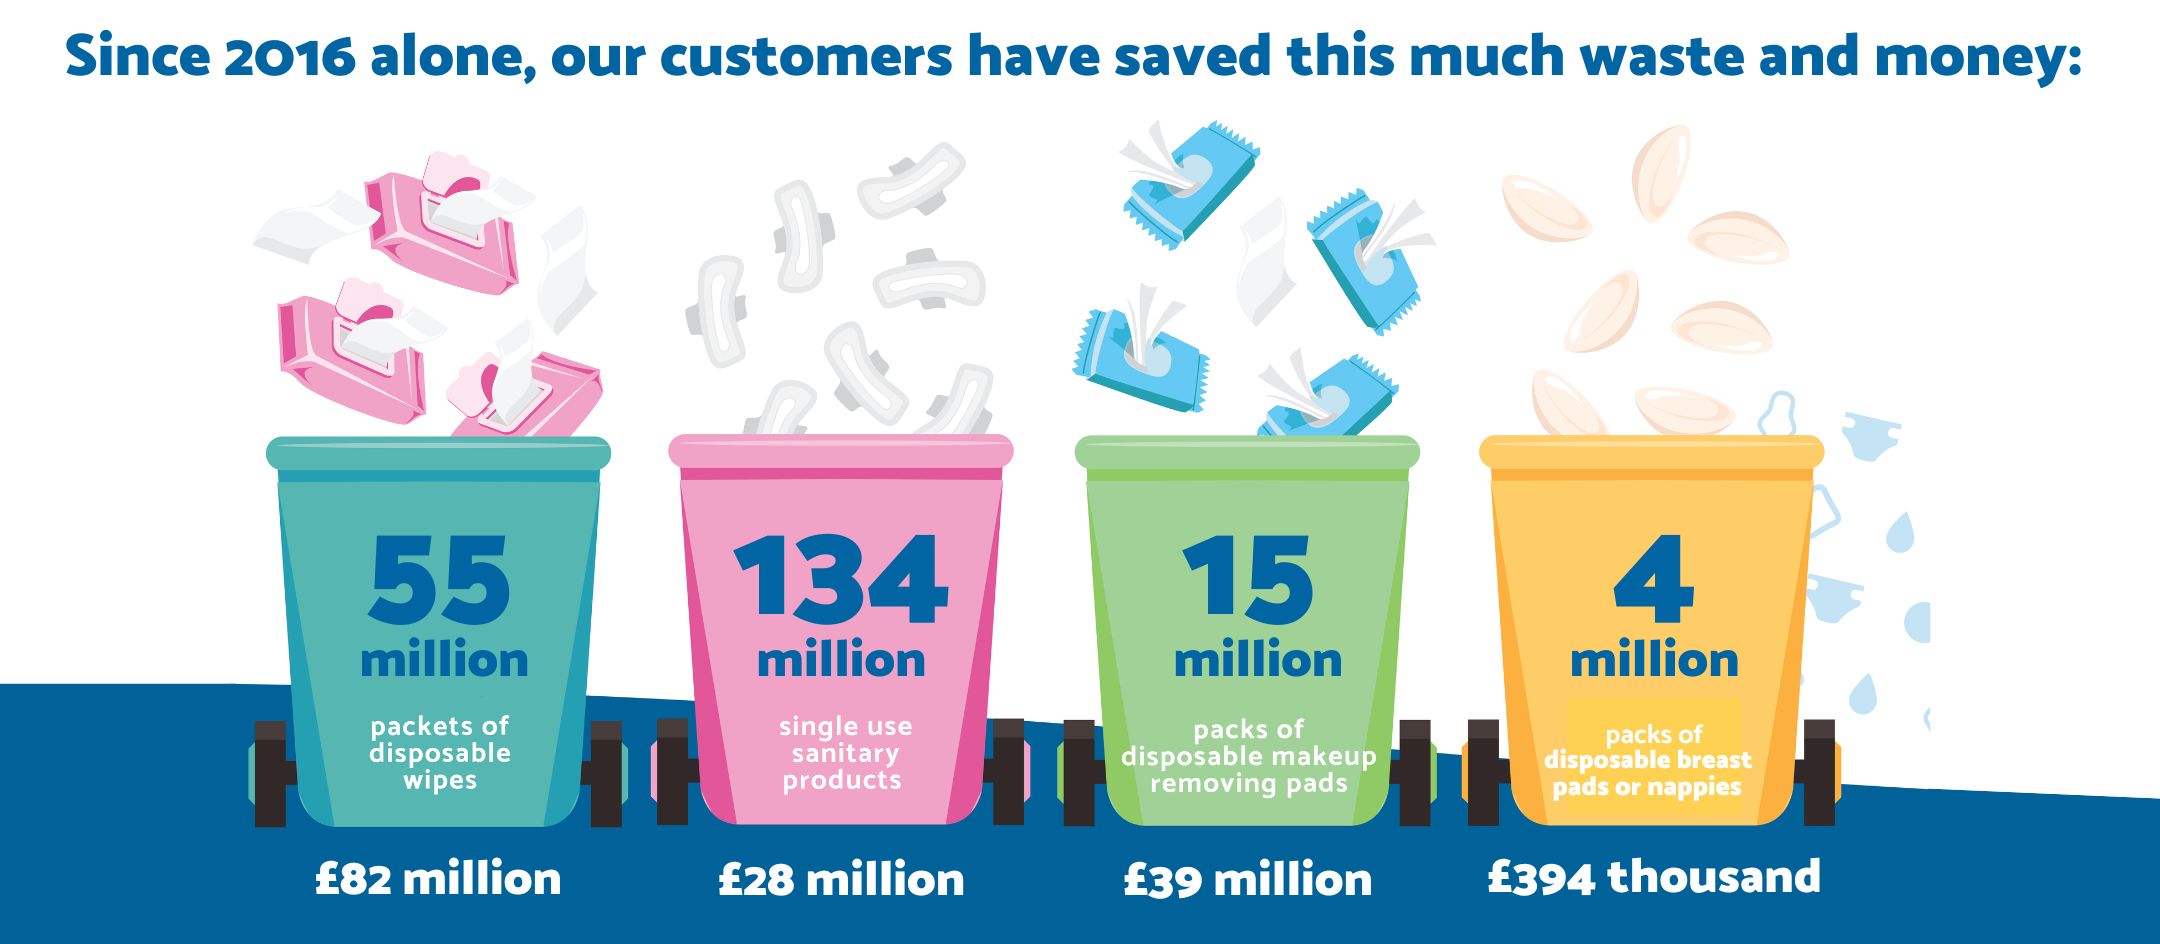 Cheeky Wipes have saved almost 210 MILLION single use period products or packs of wipes from landfill since 2016